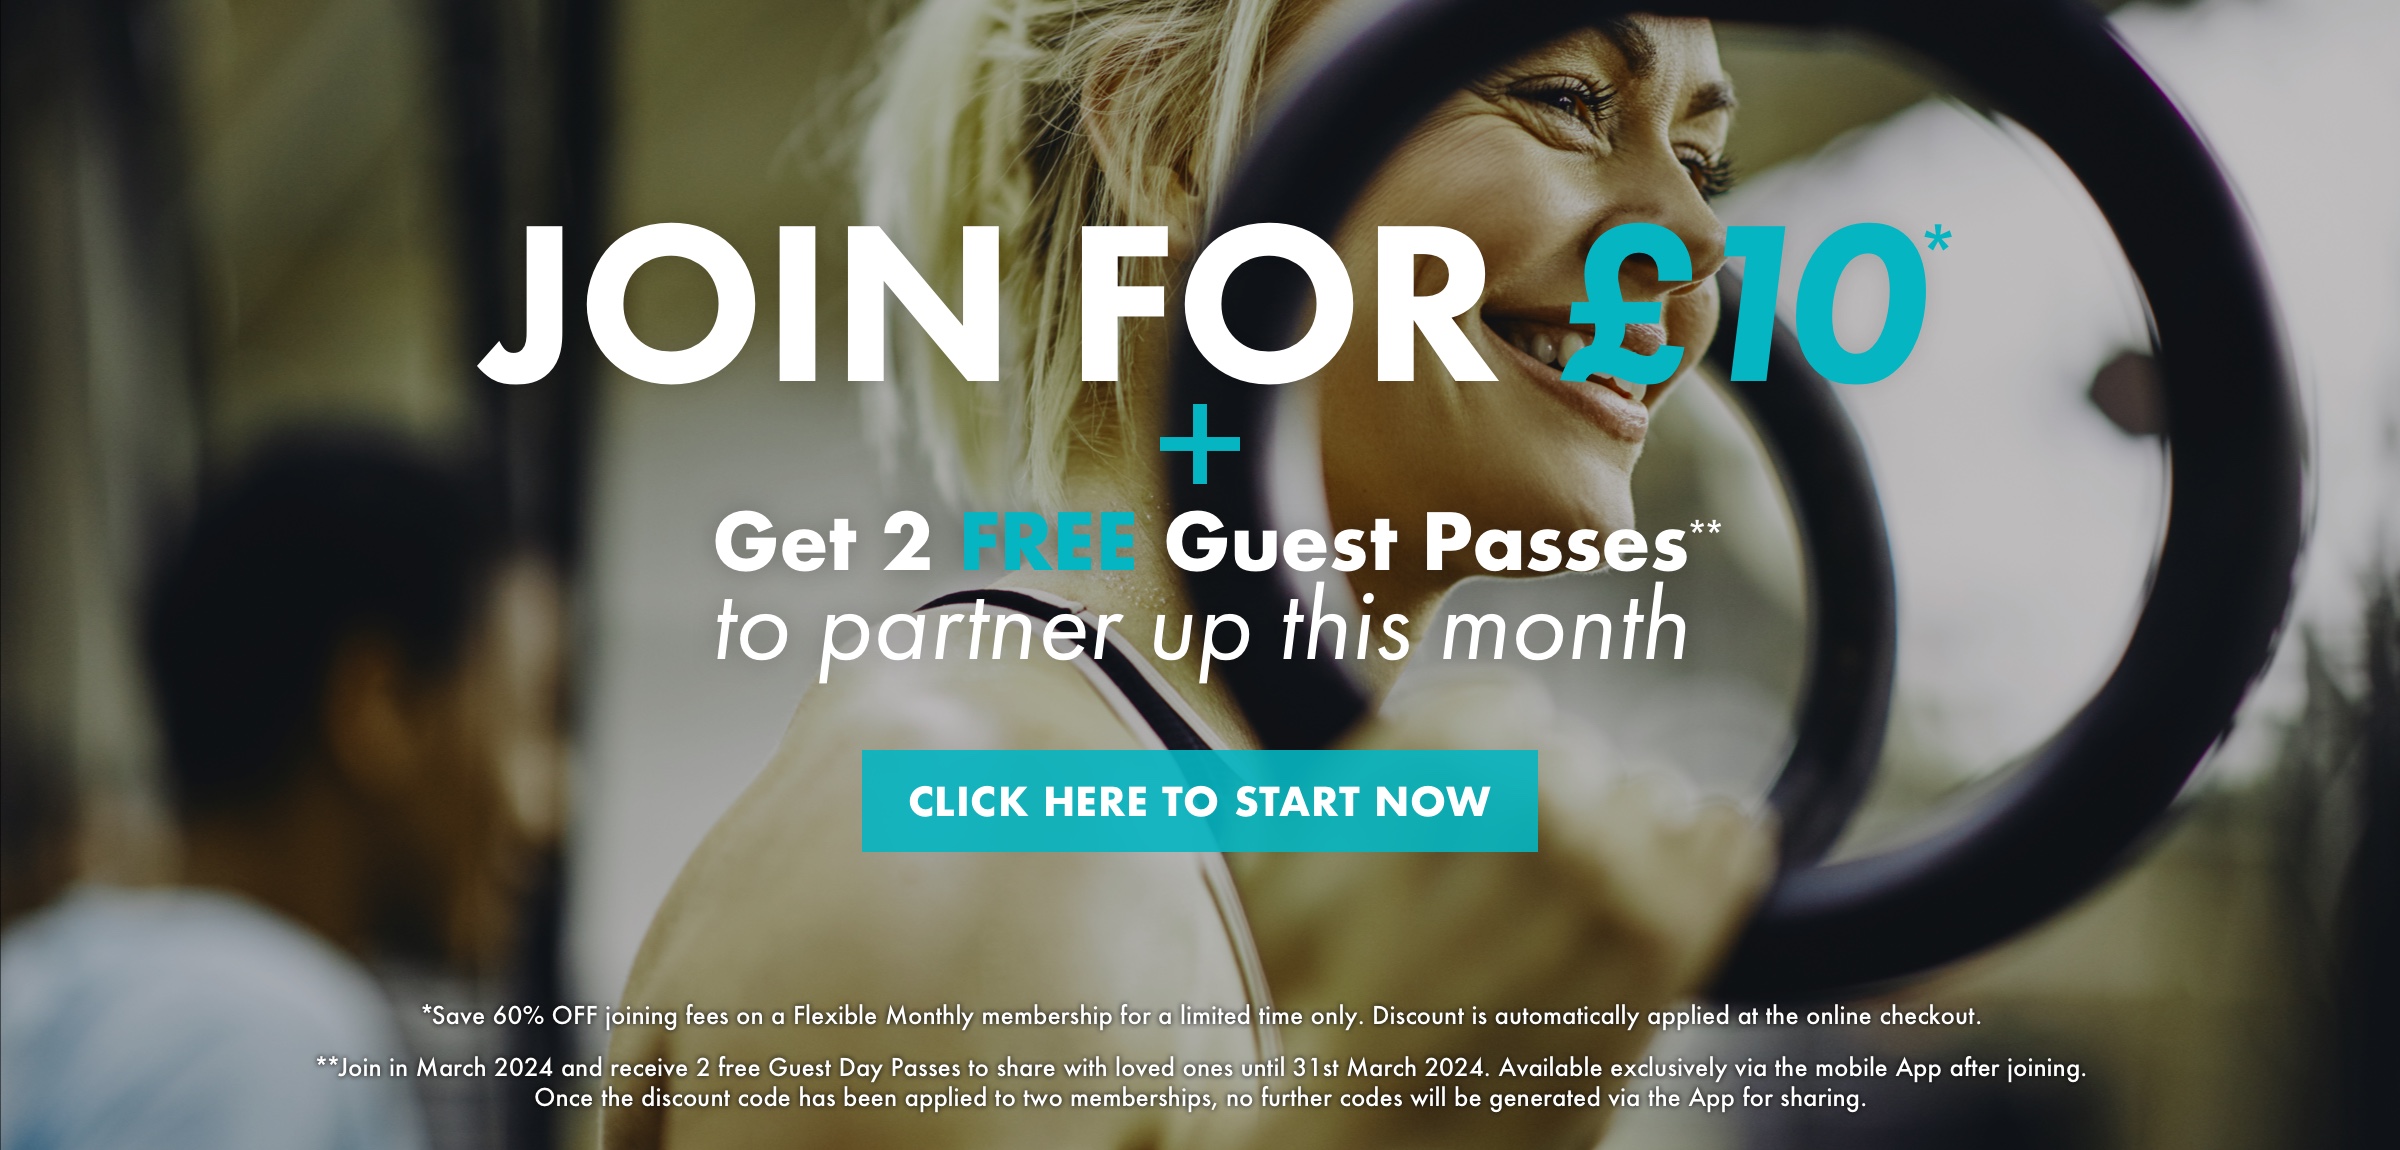 Join Gym for £10 + 2 Free Guest Passes